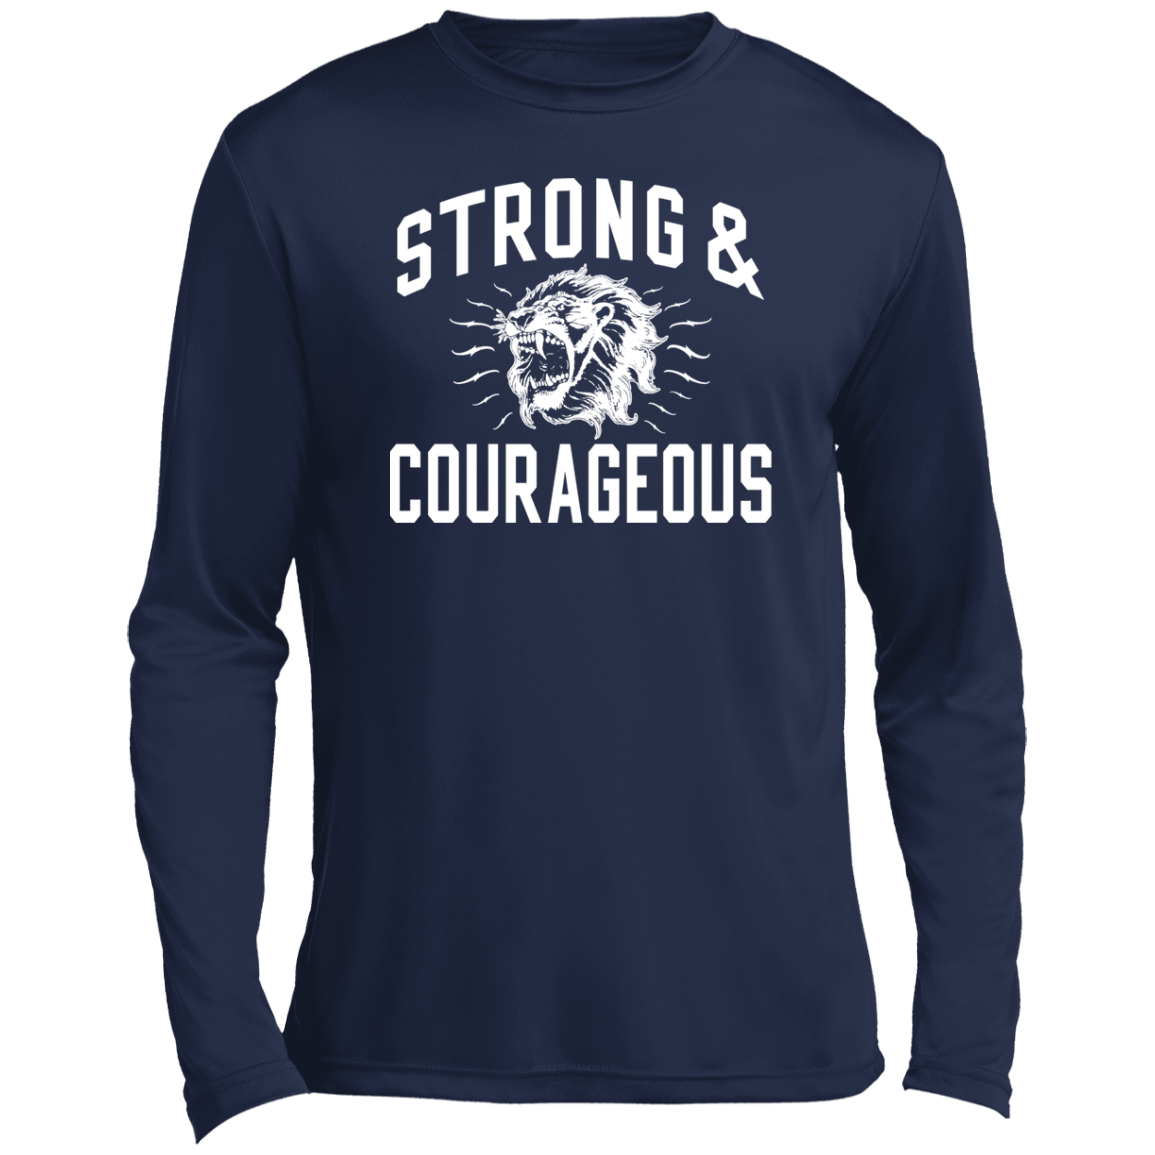 Strong & Courageous Long Sleeve Performance Tee